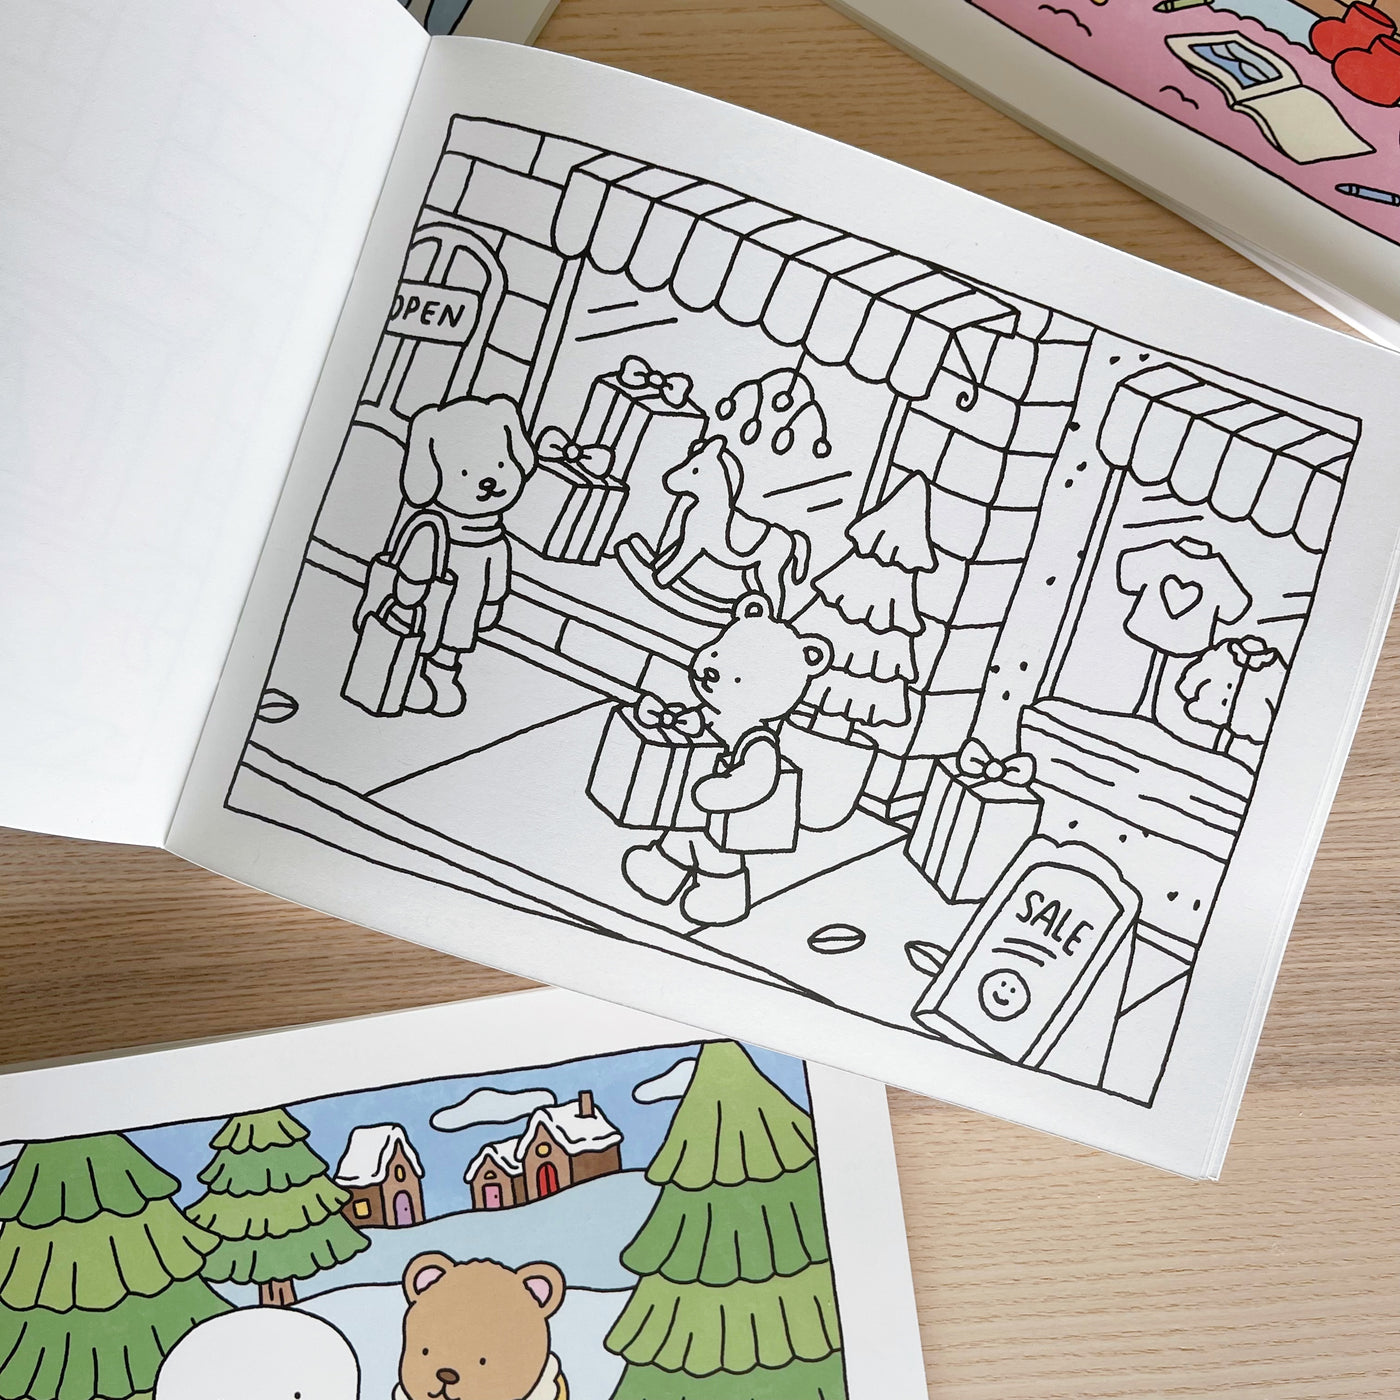 Bobbie goods  Bear coloring pages, Coloring books, Coloring book art